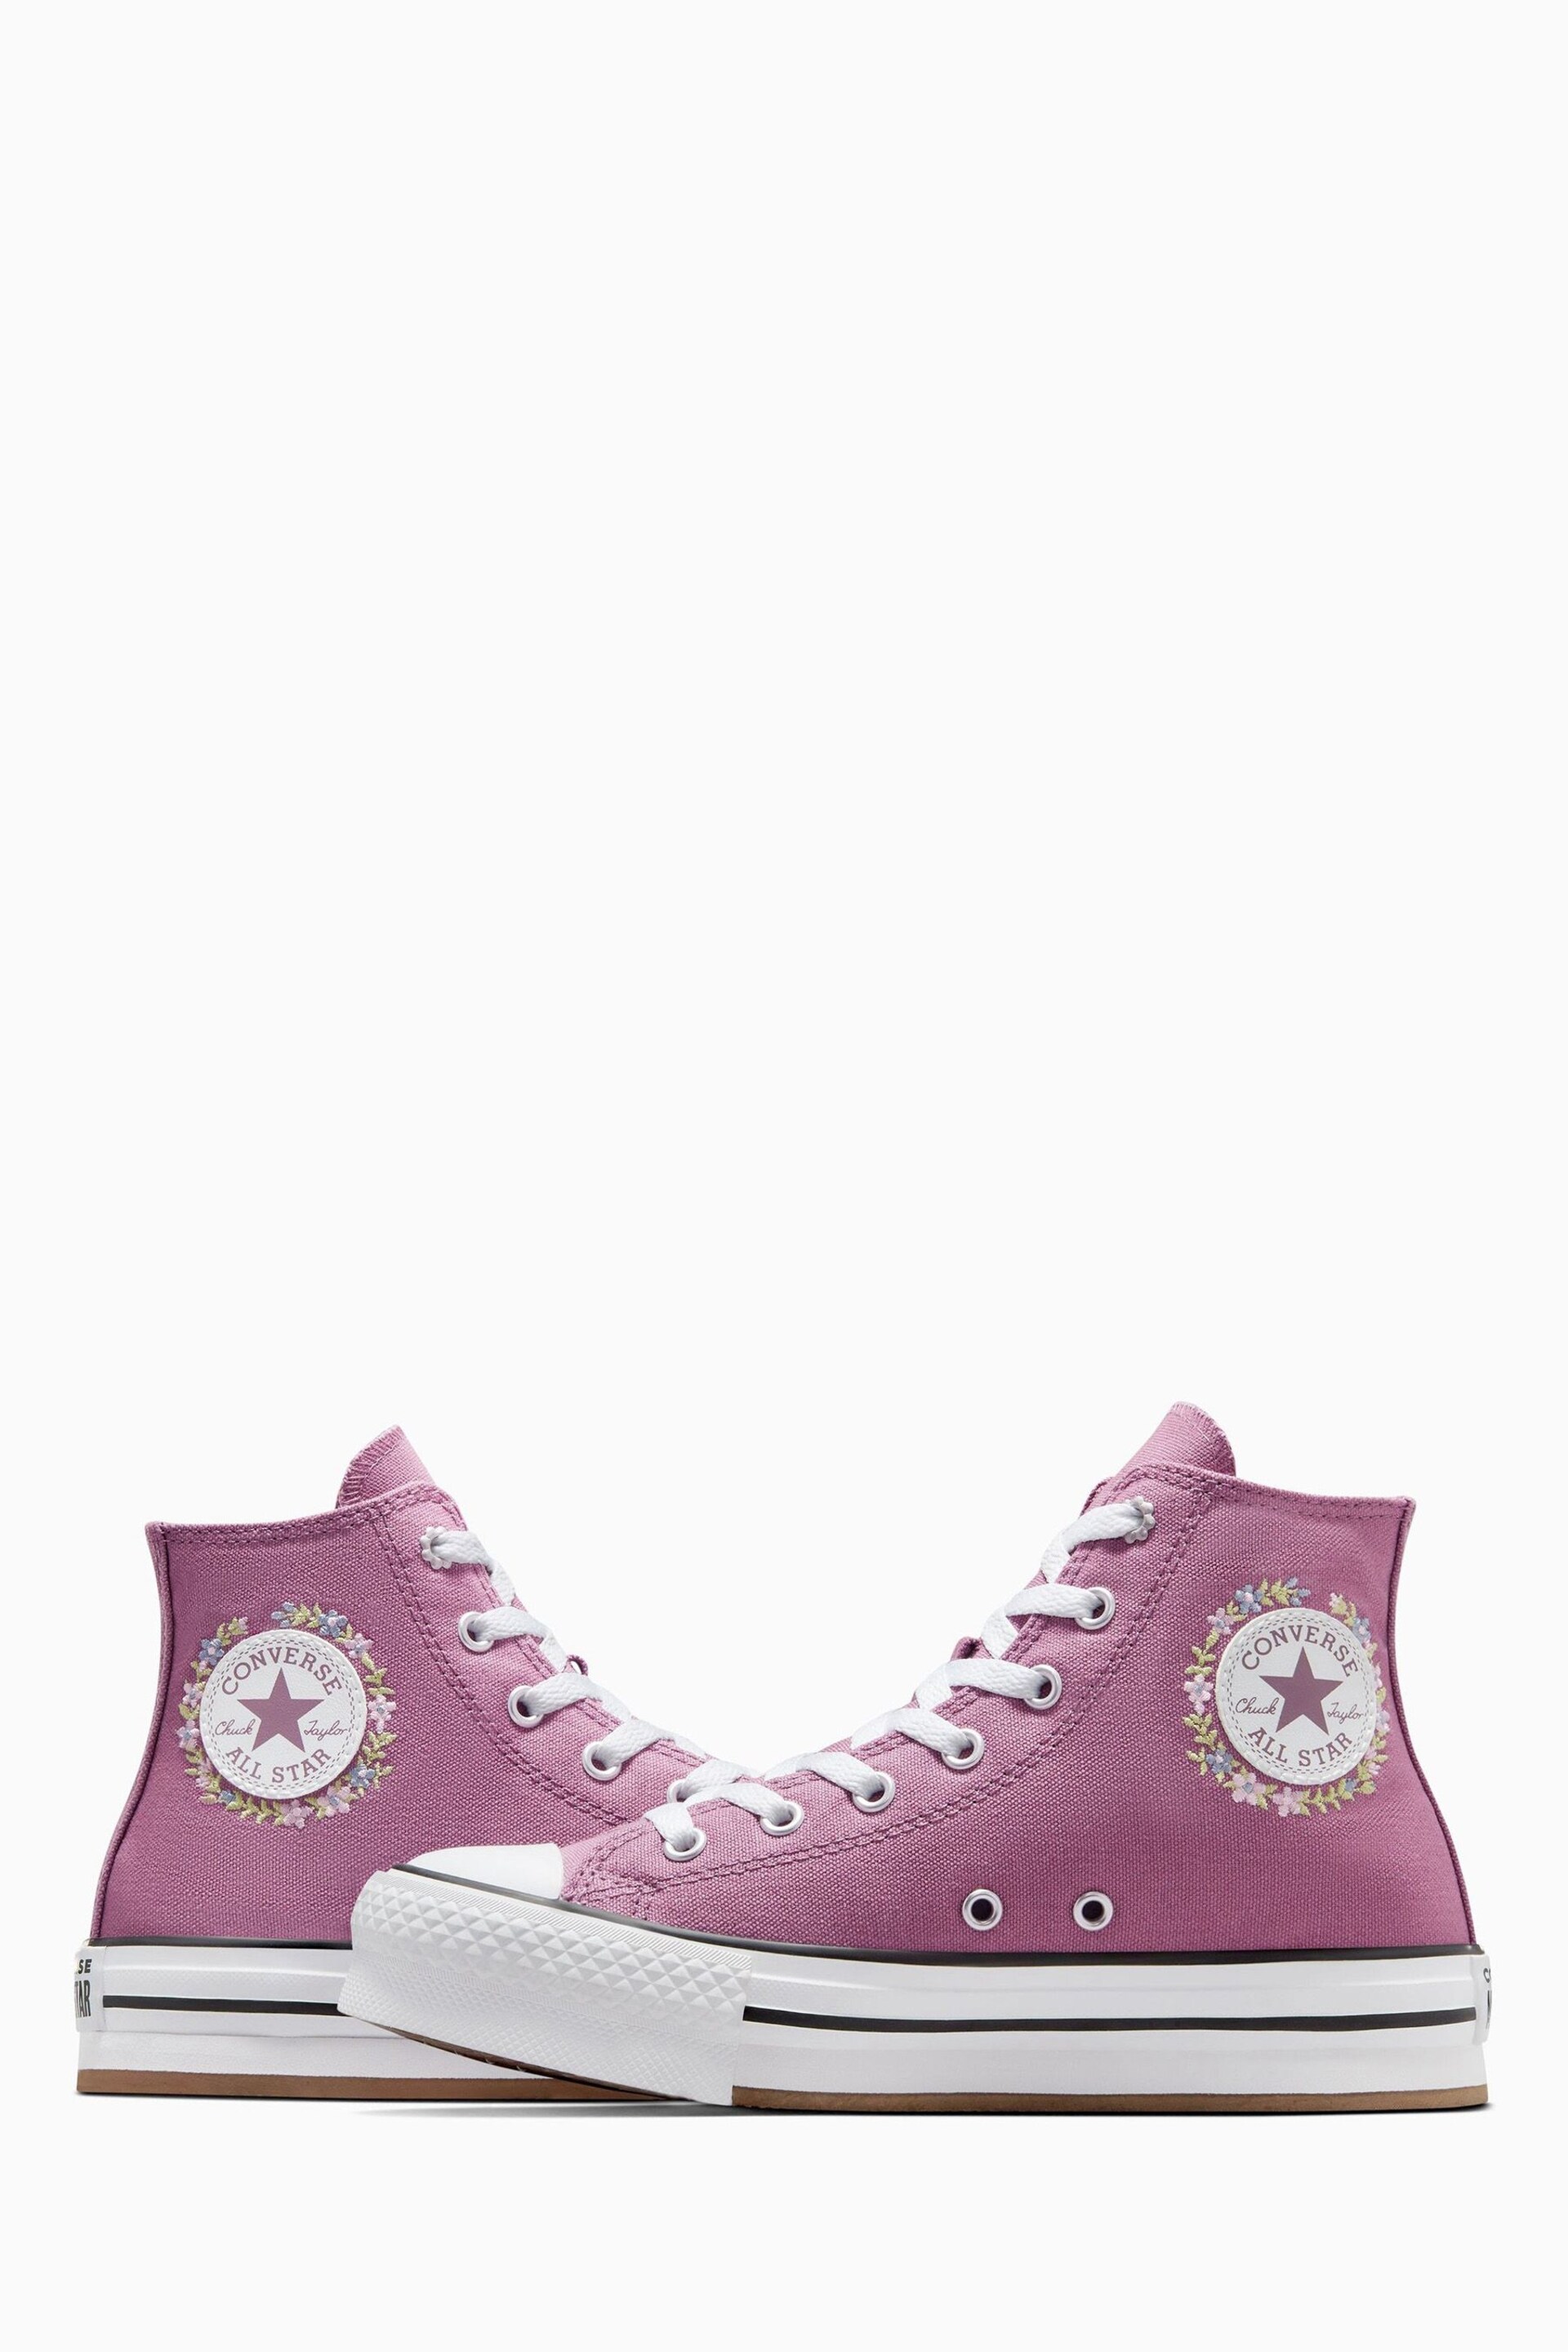 Converse Pink Youth Eva Lift Trainers - Image 7 of 10